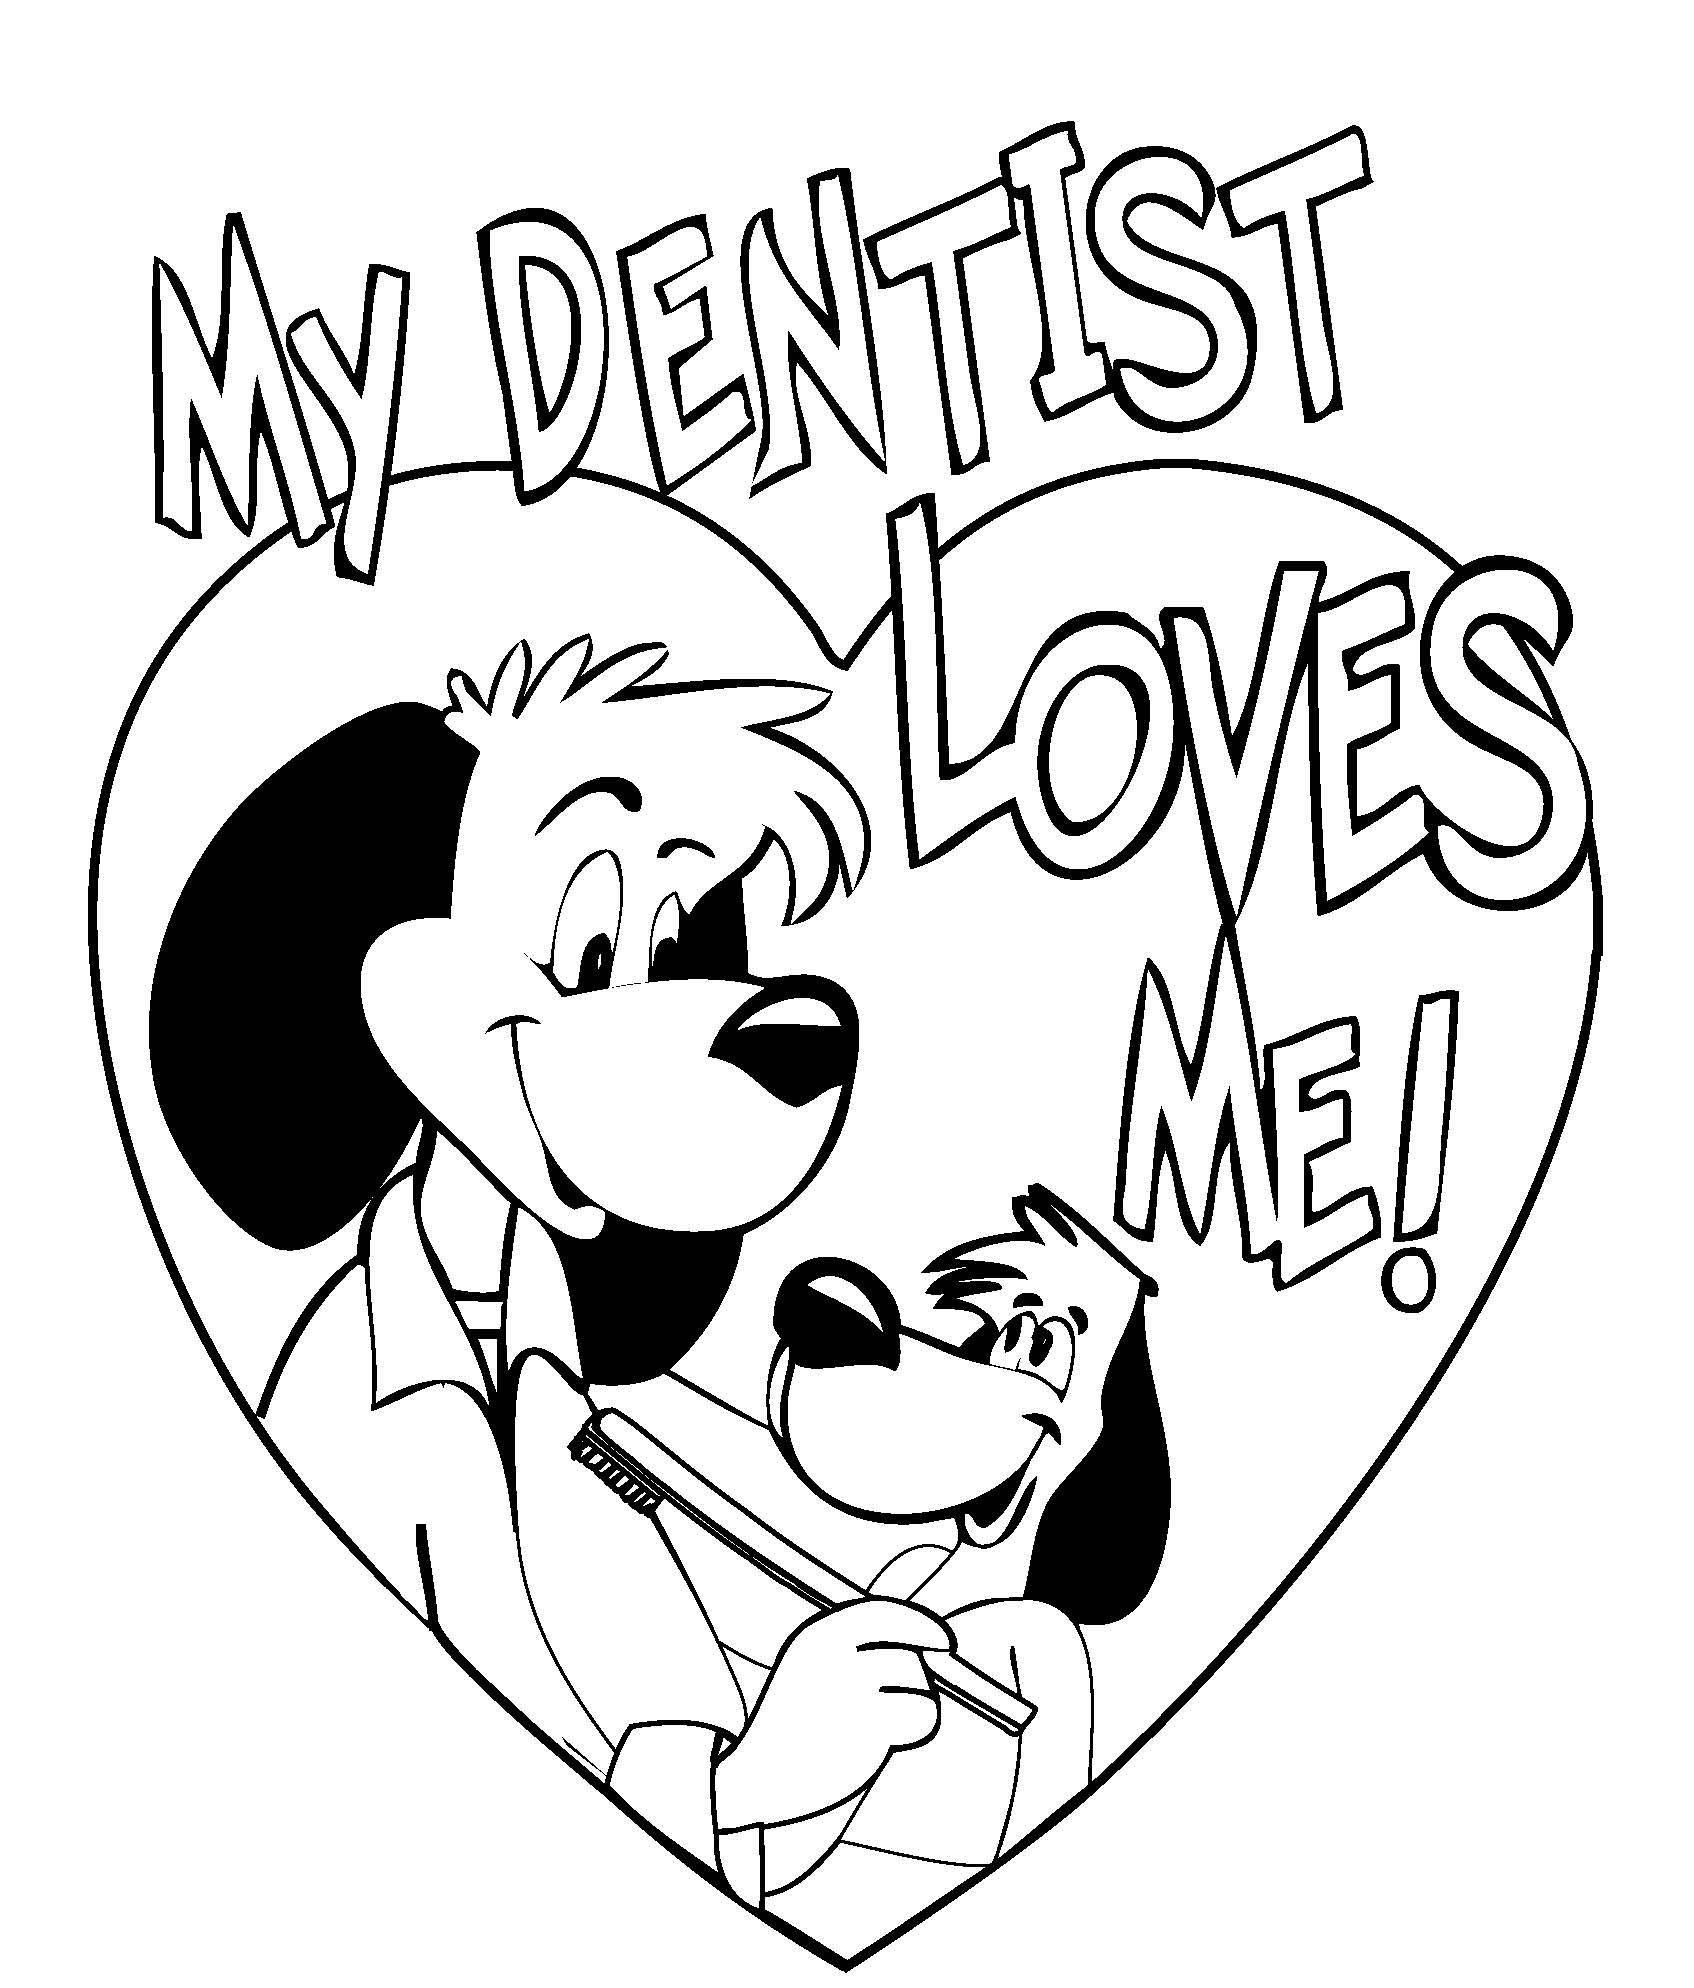  Dentist Love Me Coloring Pages